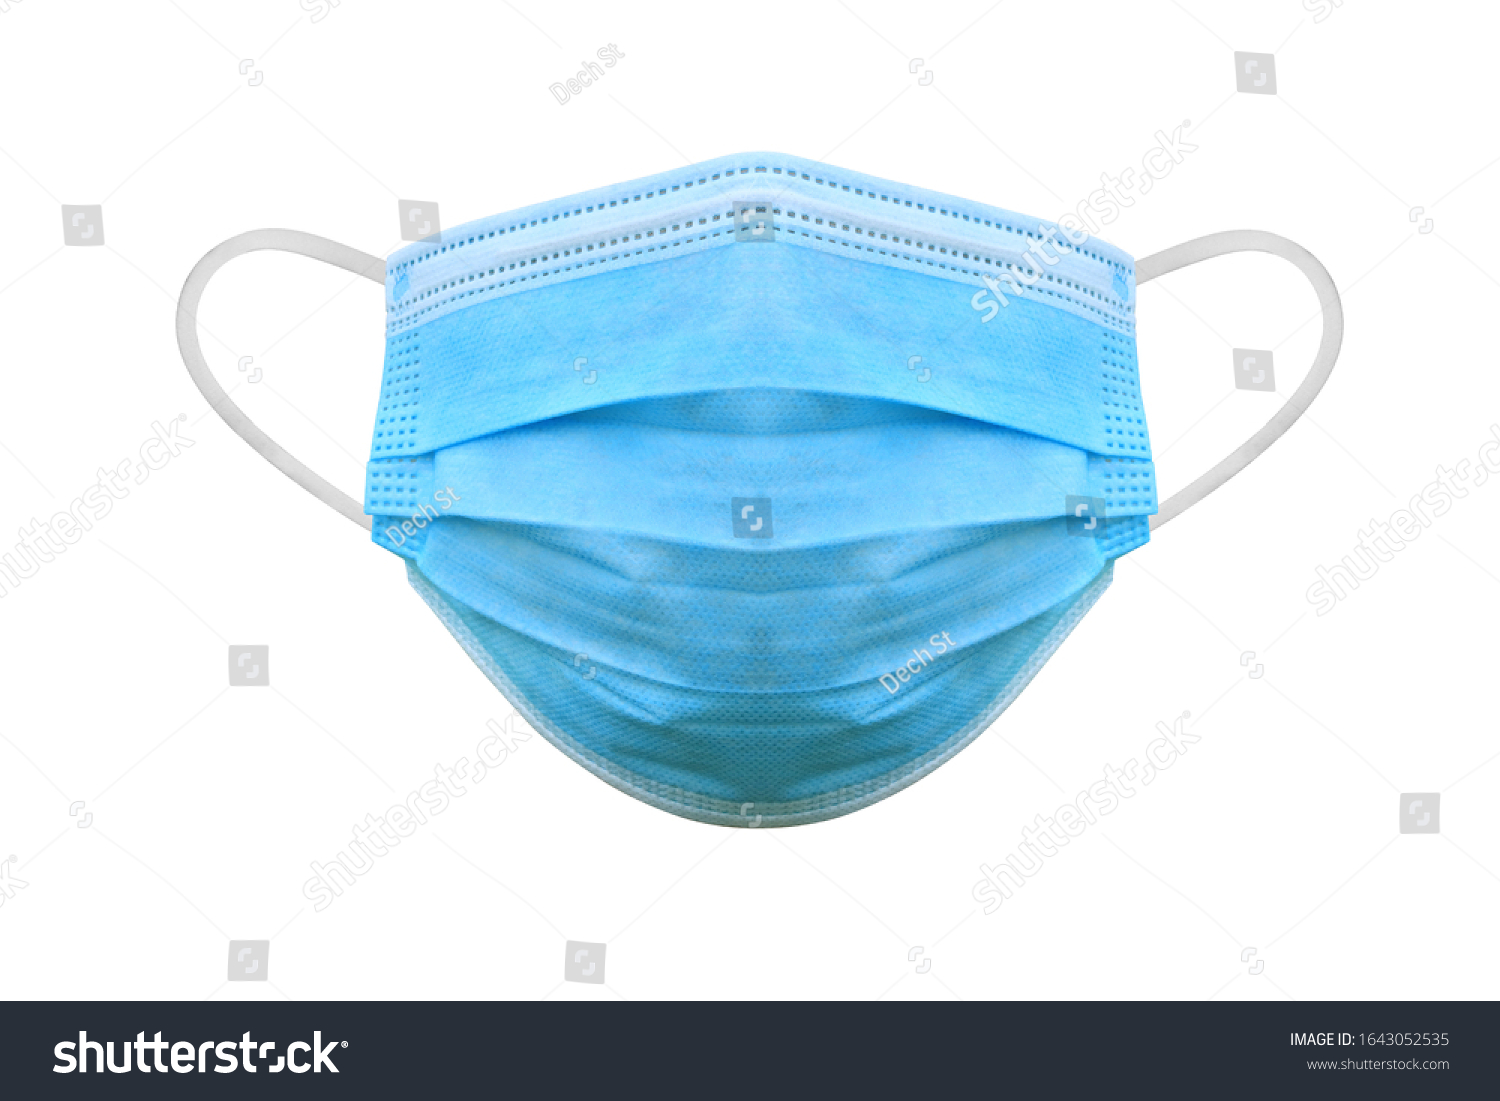 Medical protective mask on white background, Prevent Coronavirus, protection factor for wuhan virus, With clipping path #1643052535